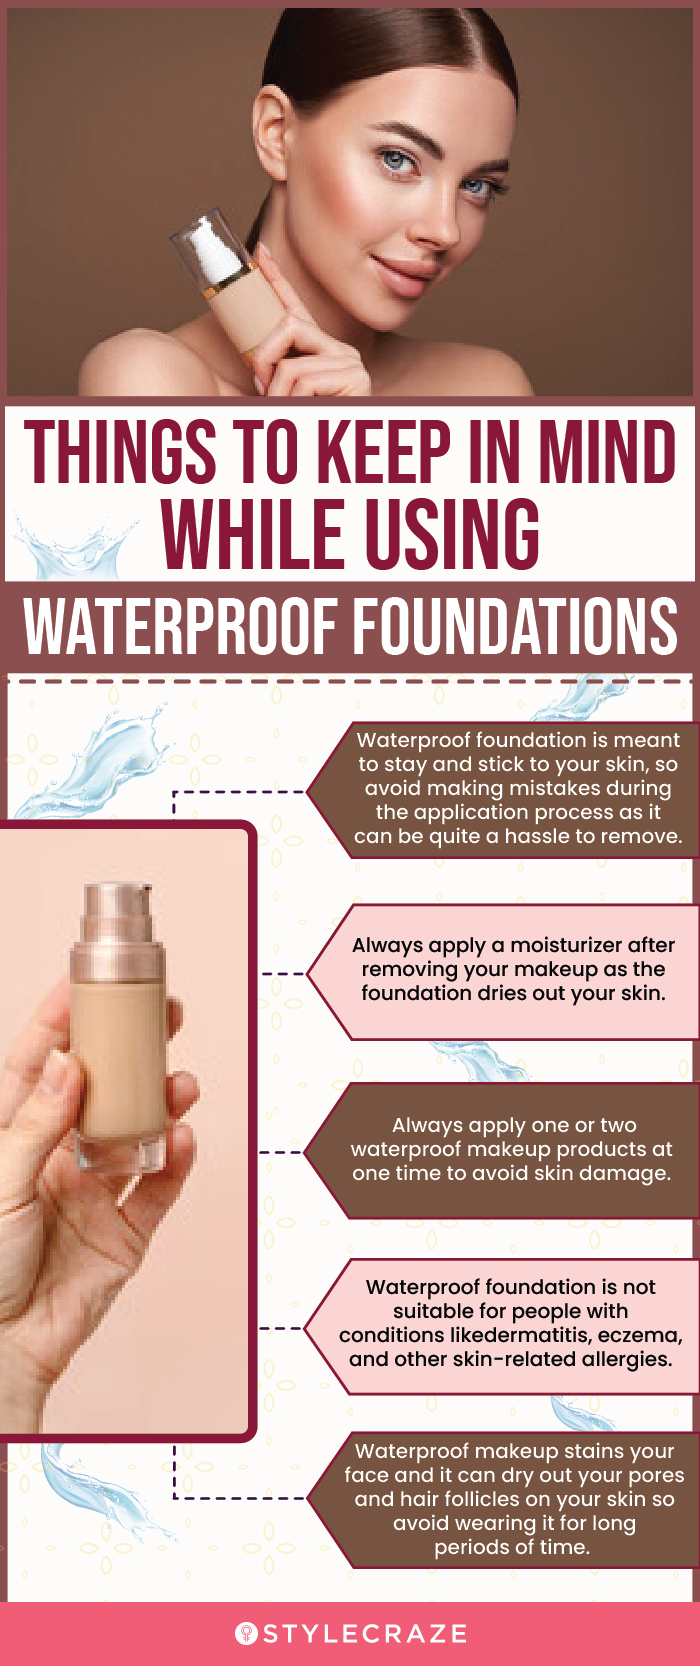 Things To Keep In Mind While Using Waterproof Foundations(infographic)